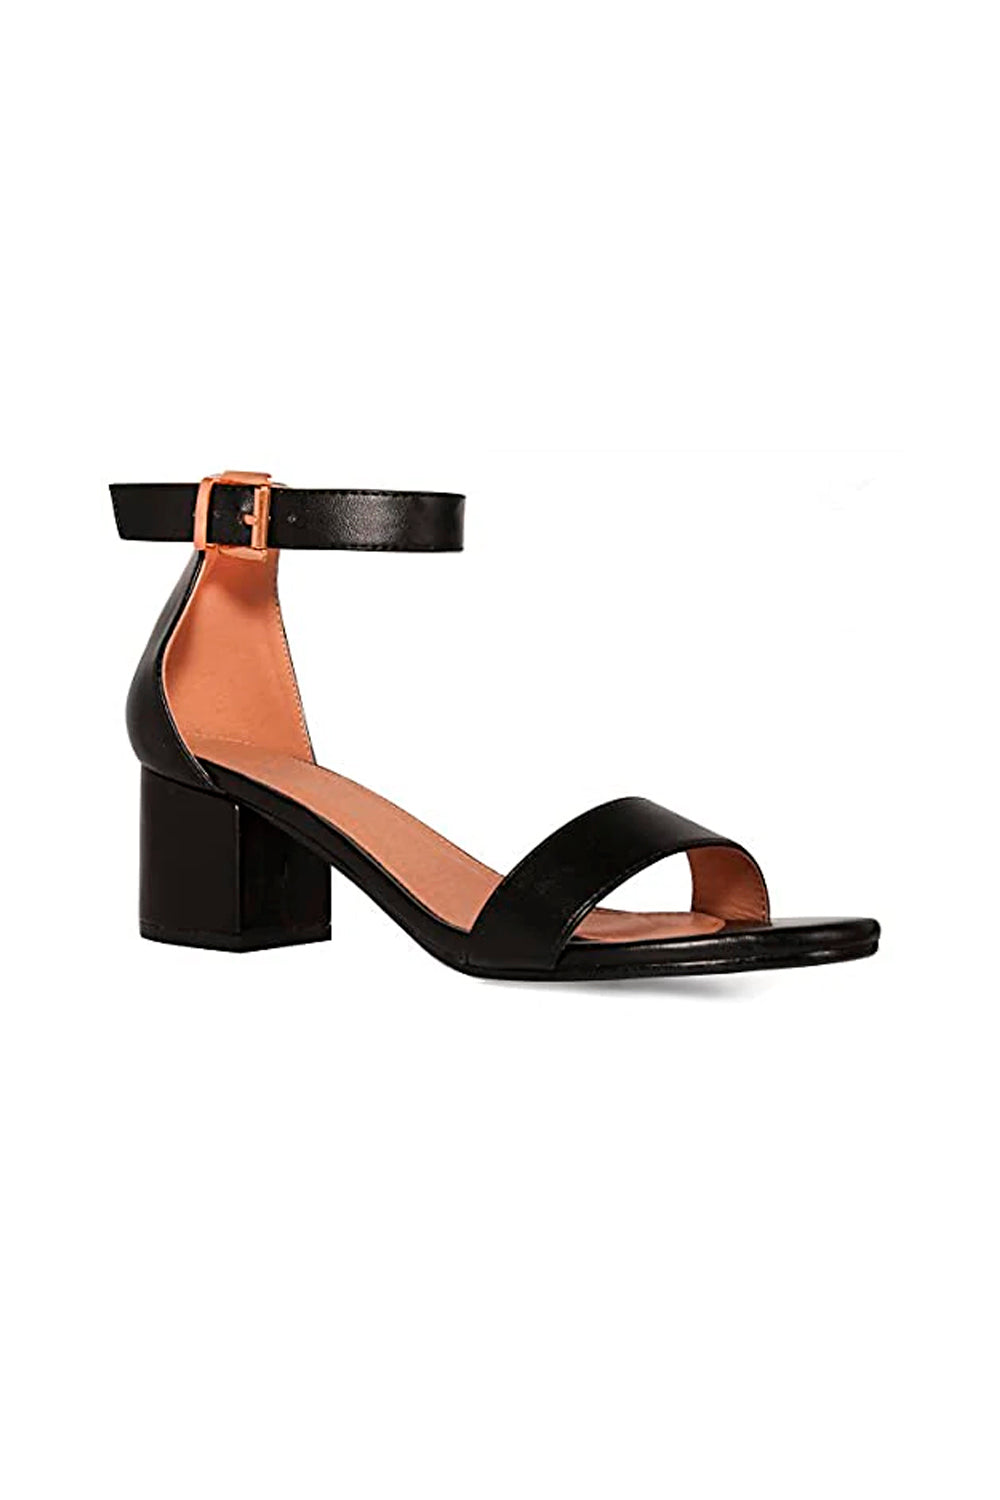 BLACK PU STRAPPY MID HIGH BLOCK HEEL SANDALS WITH ANKLE STRAP